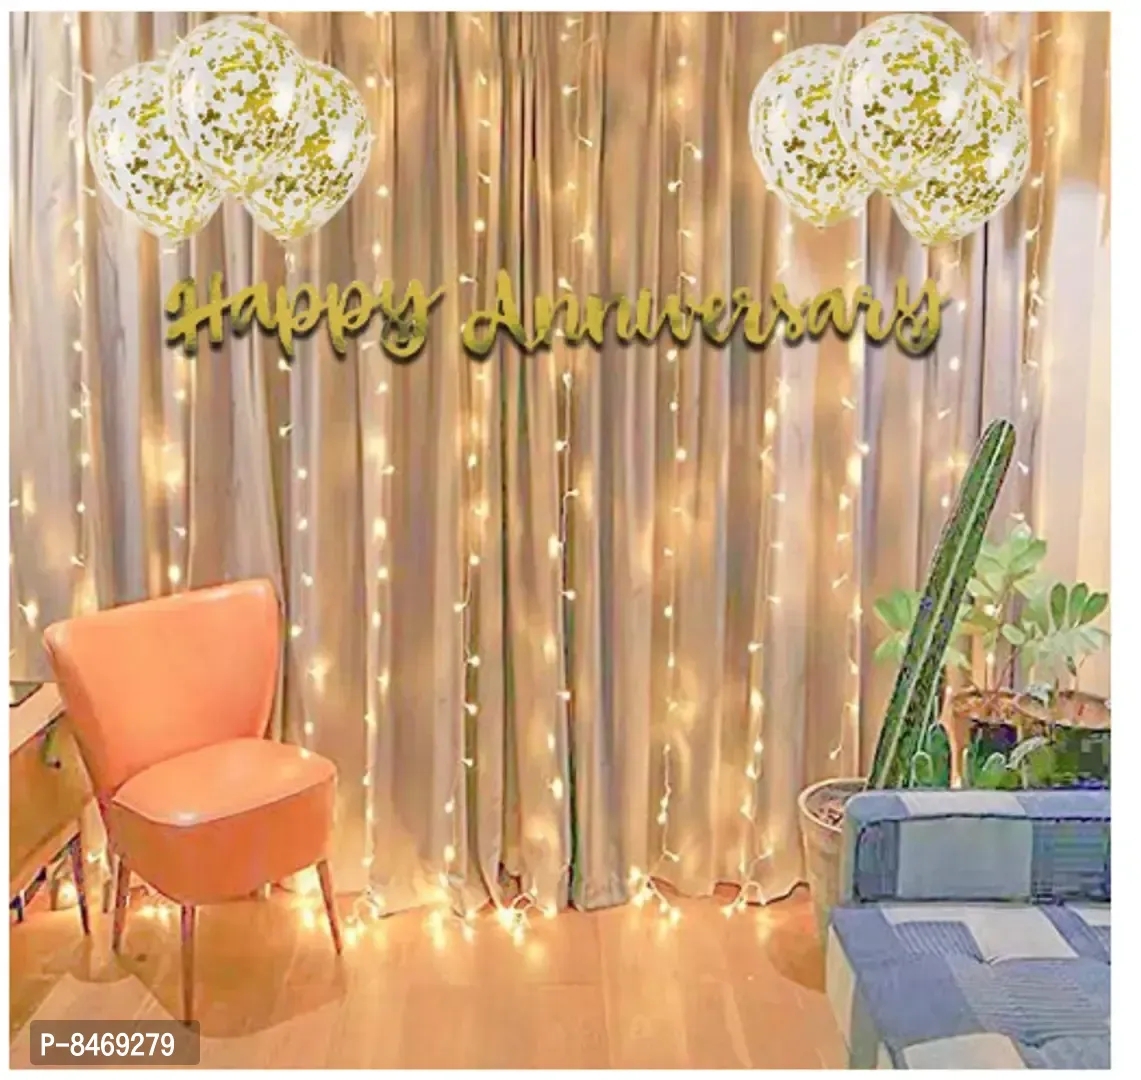 Trendy Golden Anniversary Decoration Items Like Happy Anniversary Cursive Banner, Fairy Light, Confetti Rubber Balloons, Anniversary Surprise Decoration - Pack Of 9 PiecesWithin 6-8 business days However, to find out an actual date of delivery, please enter your pin code.Trendy Golden Anniversary Decoration Items Like Happy Anniversary Cursive Banner, Fairy Light, Confetti Rubber B